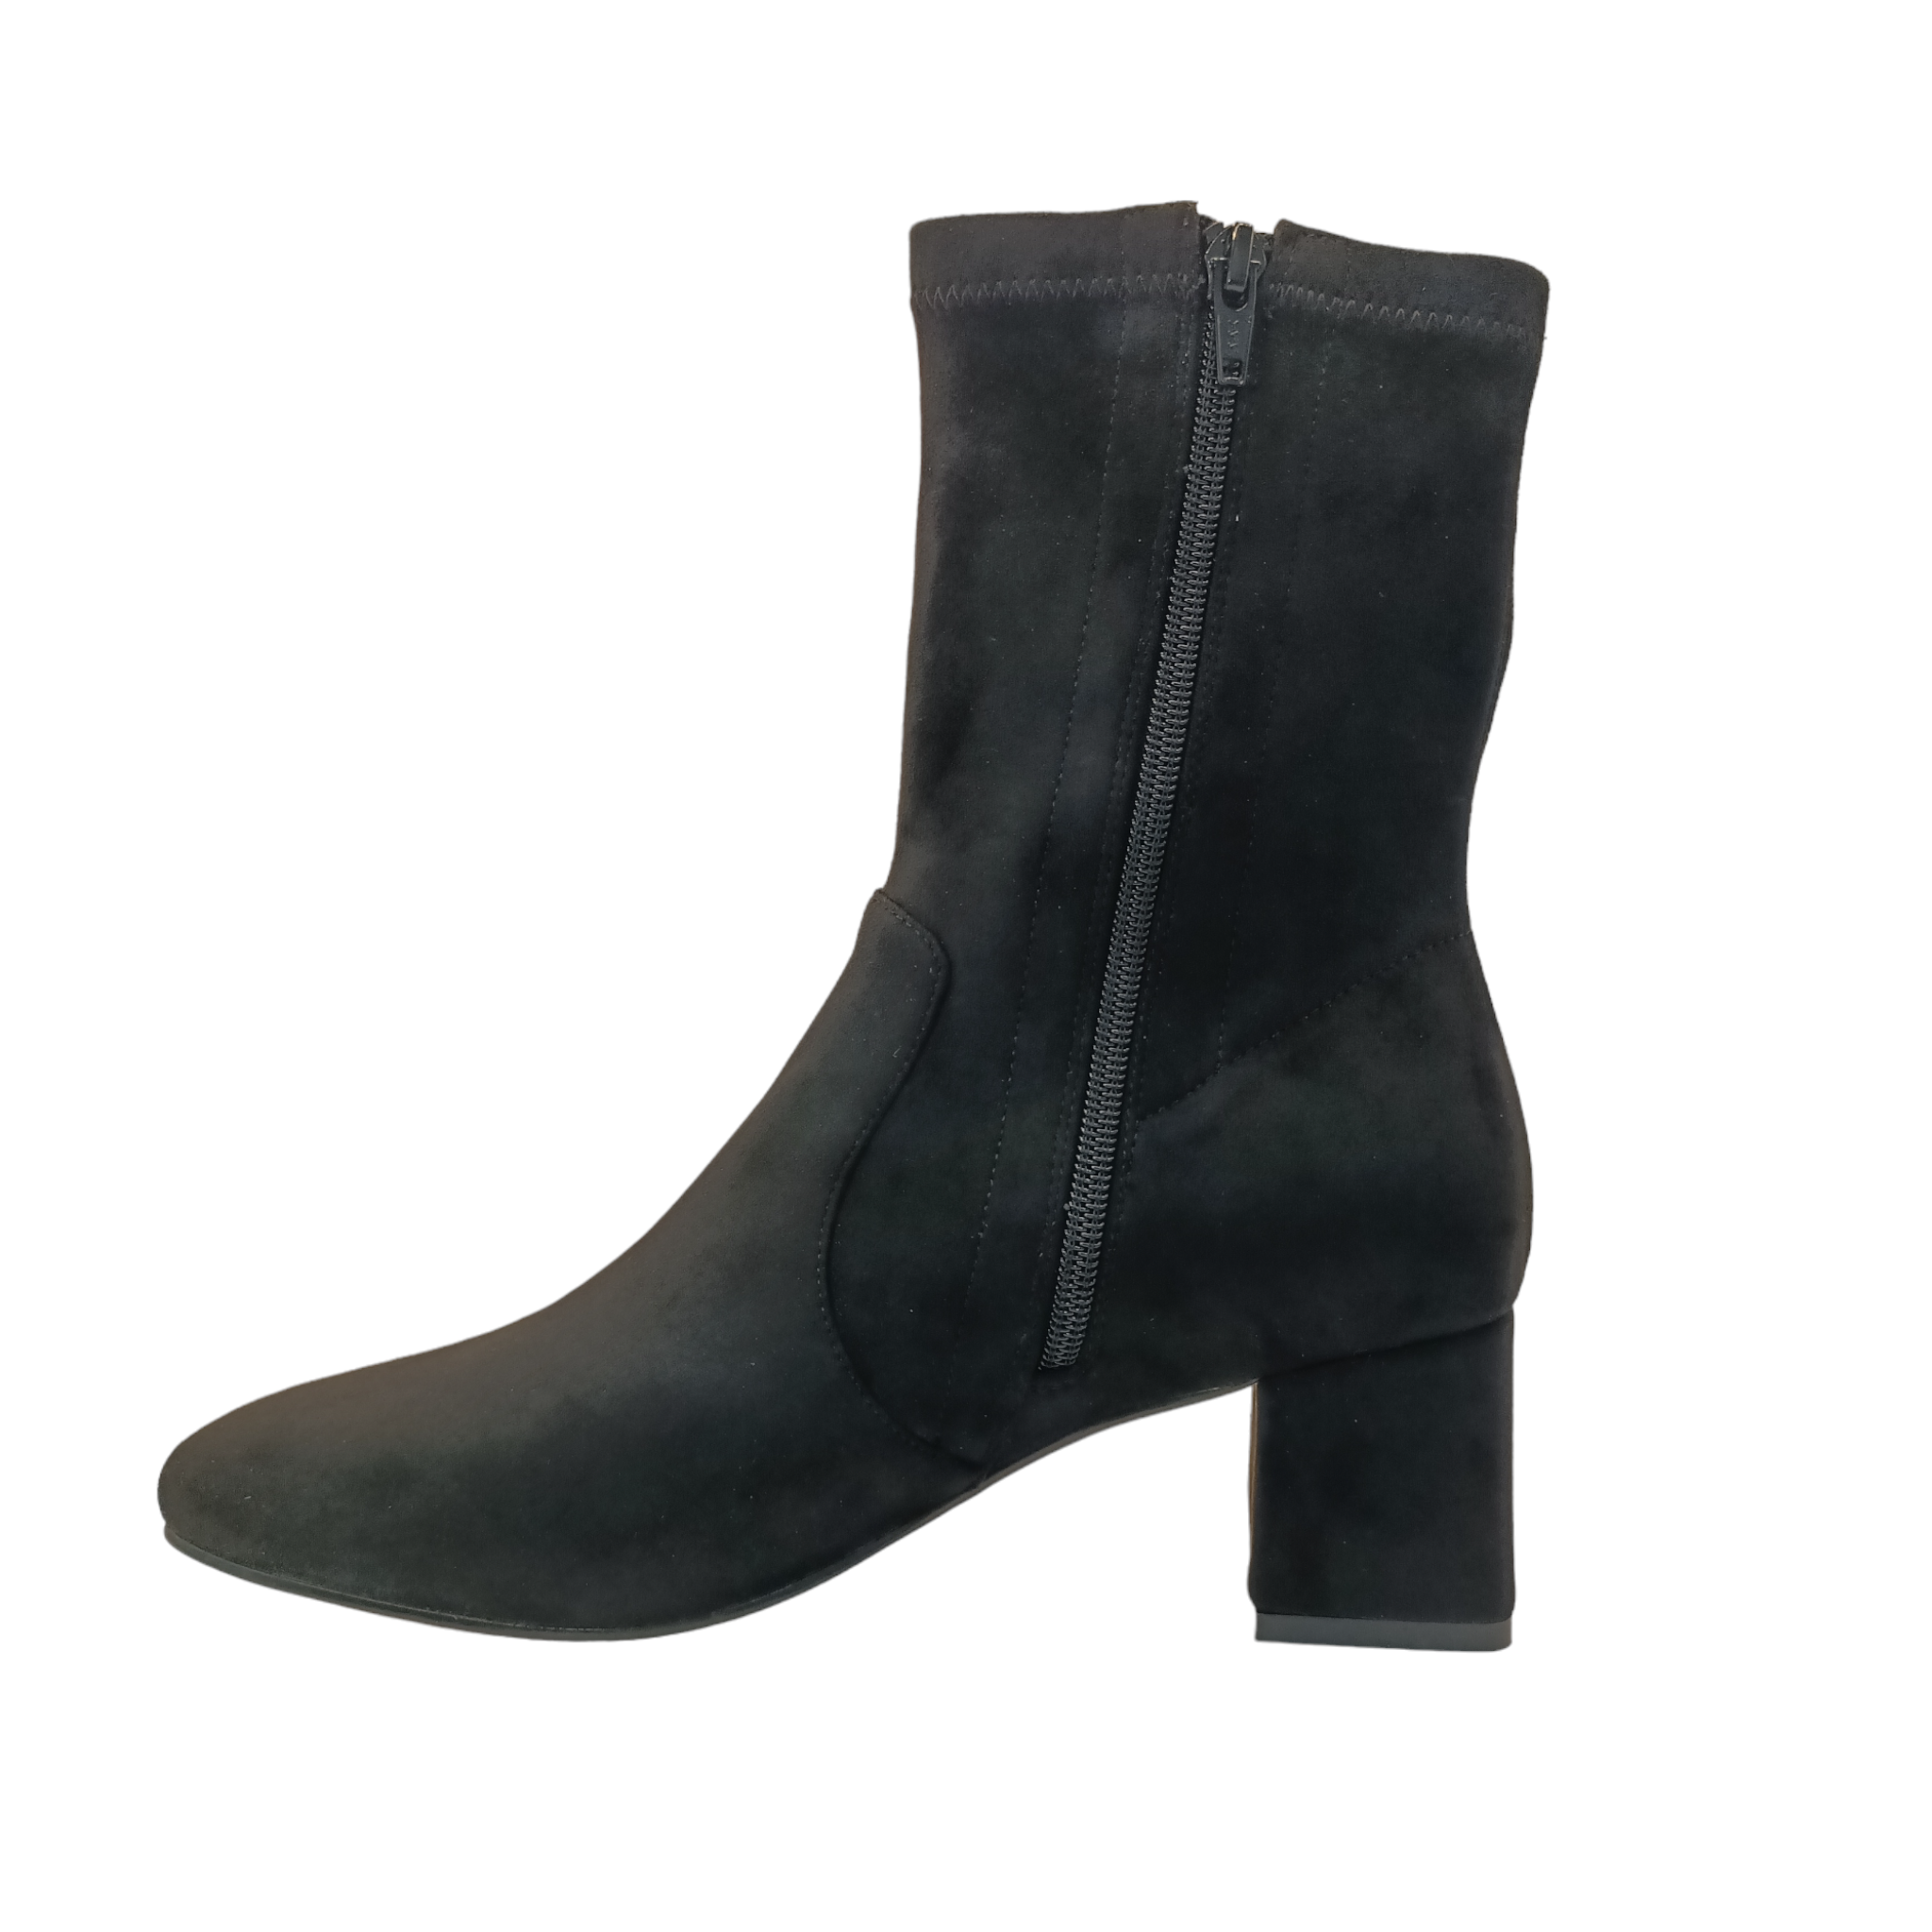 Shop Andi Bresley - with shoe&amp;me - from Bresley - Boots - boots, Heel, Winter, Womens - [collection]